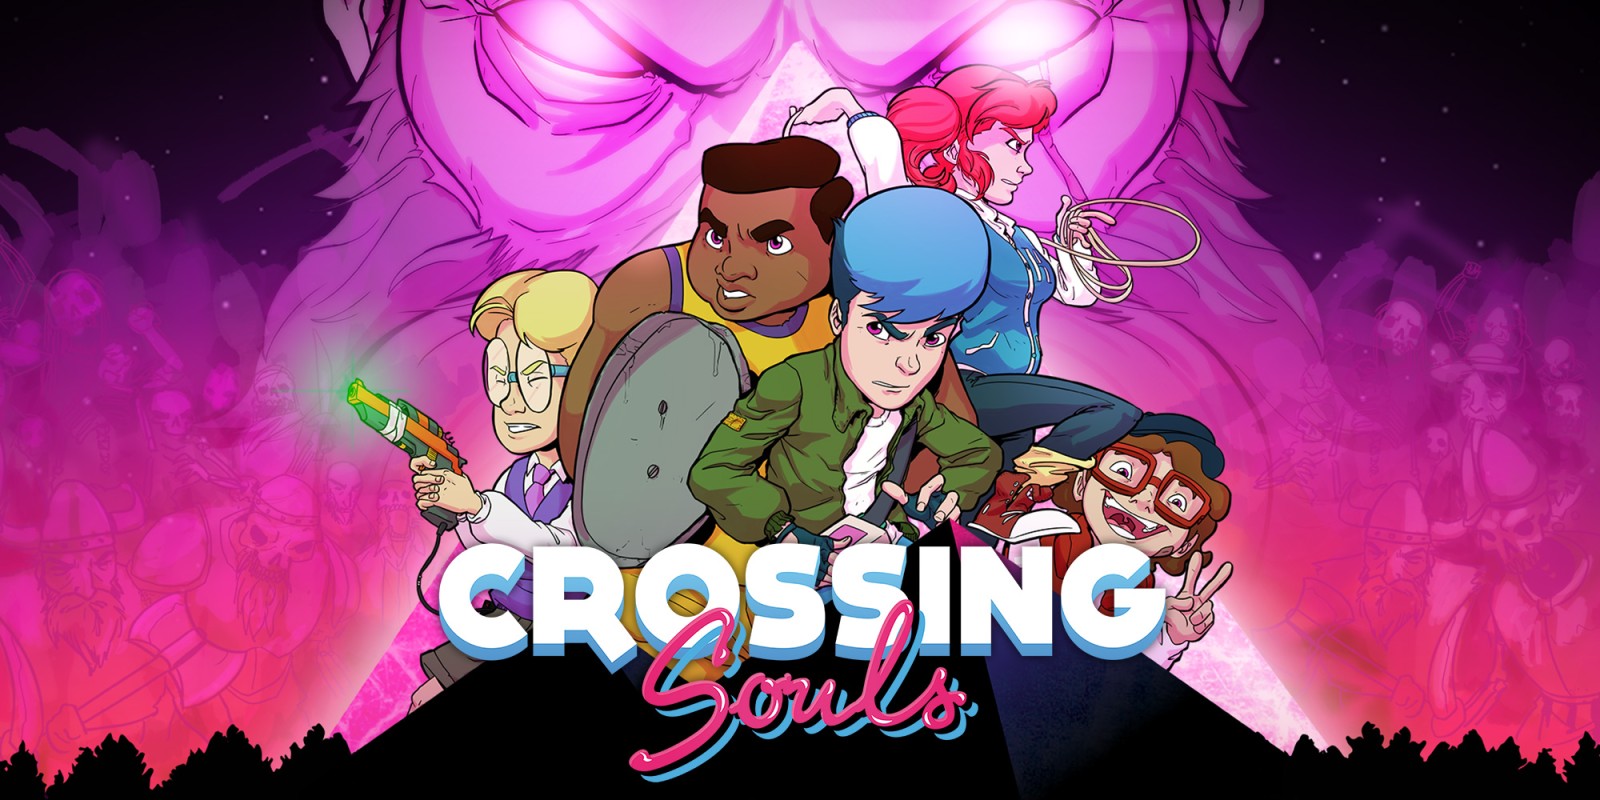 H2x1_NSwitchDS_CrossingSouls_image1600w.